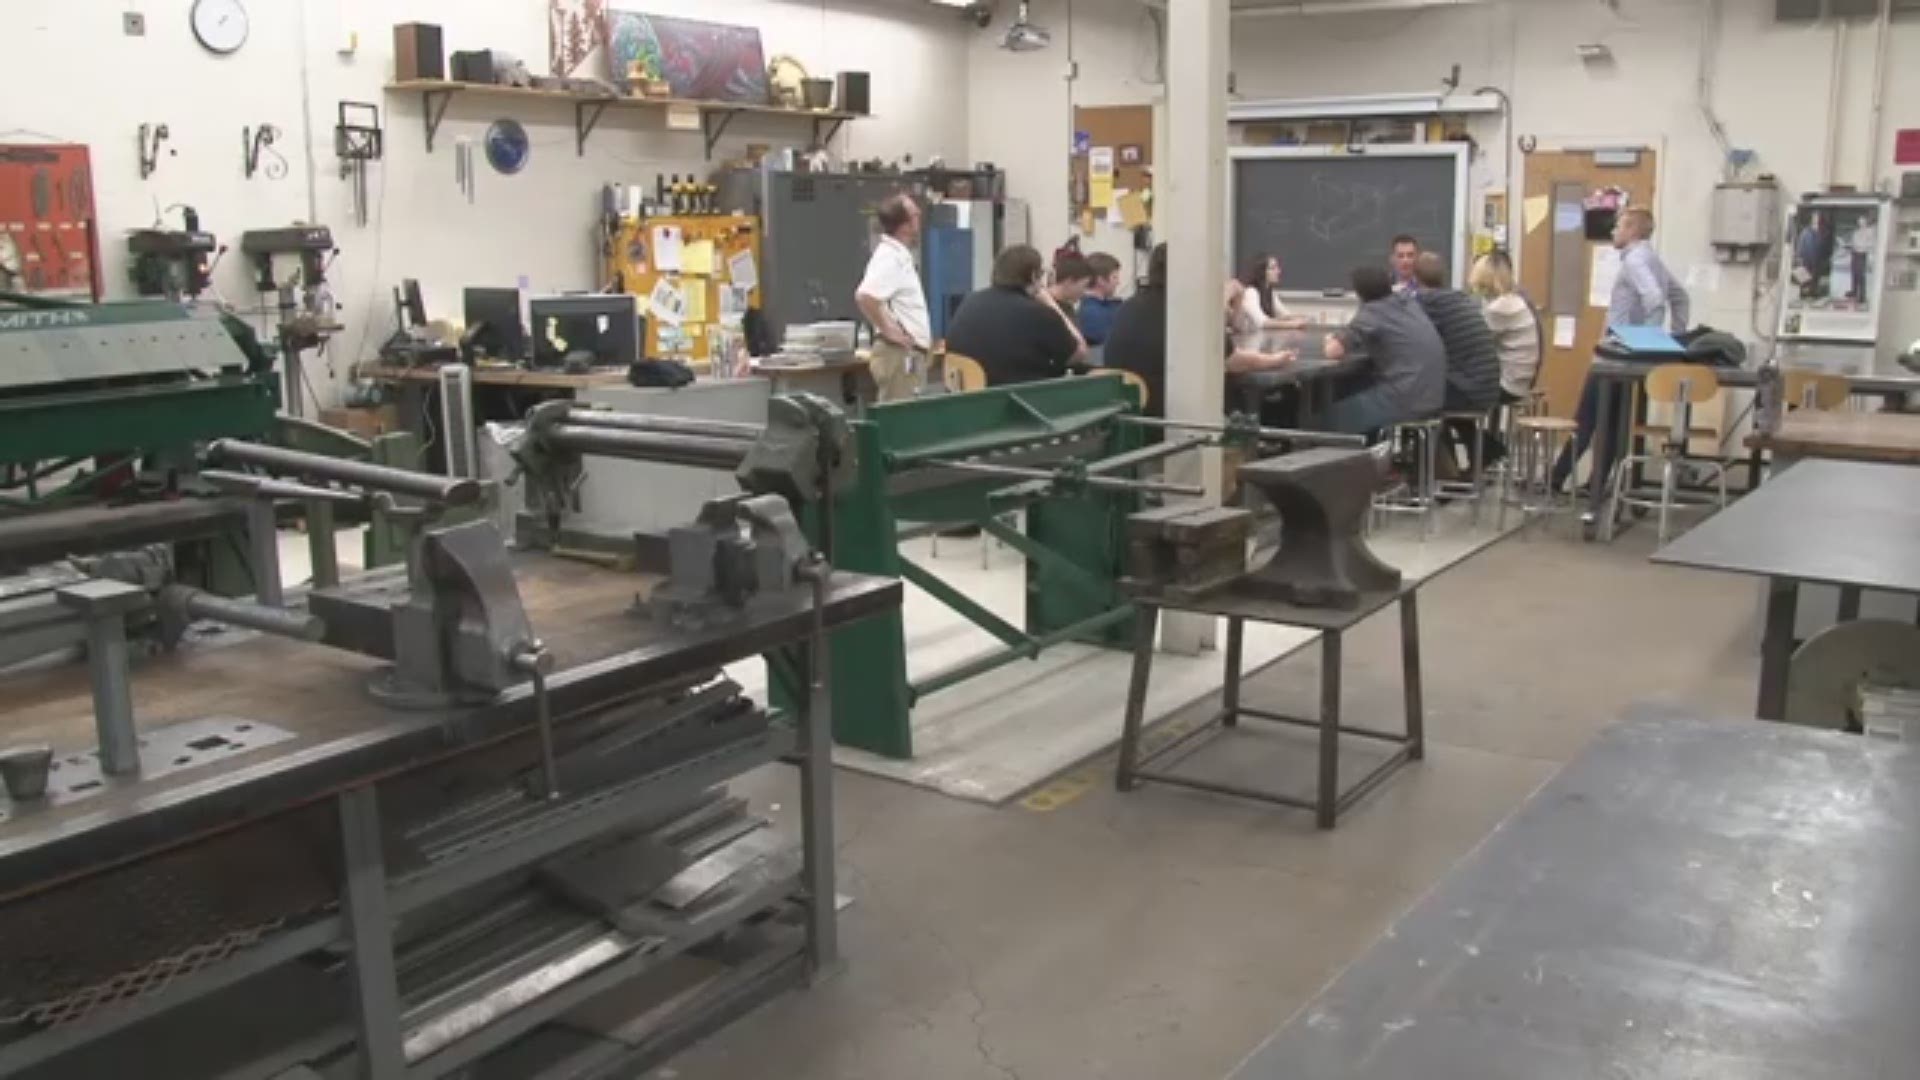 Bulldog Manufacturing is a student-run company that's turning various projects into profits and helping to fill a void in the local manufacturing sector.